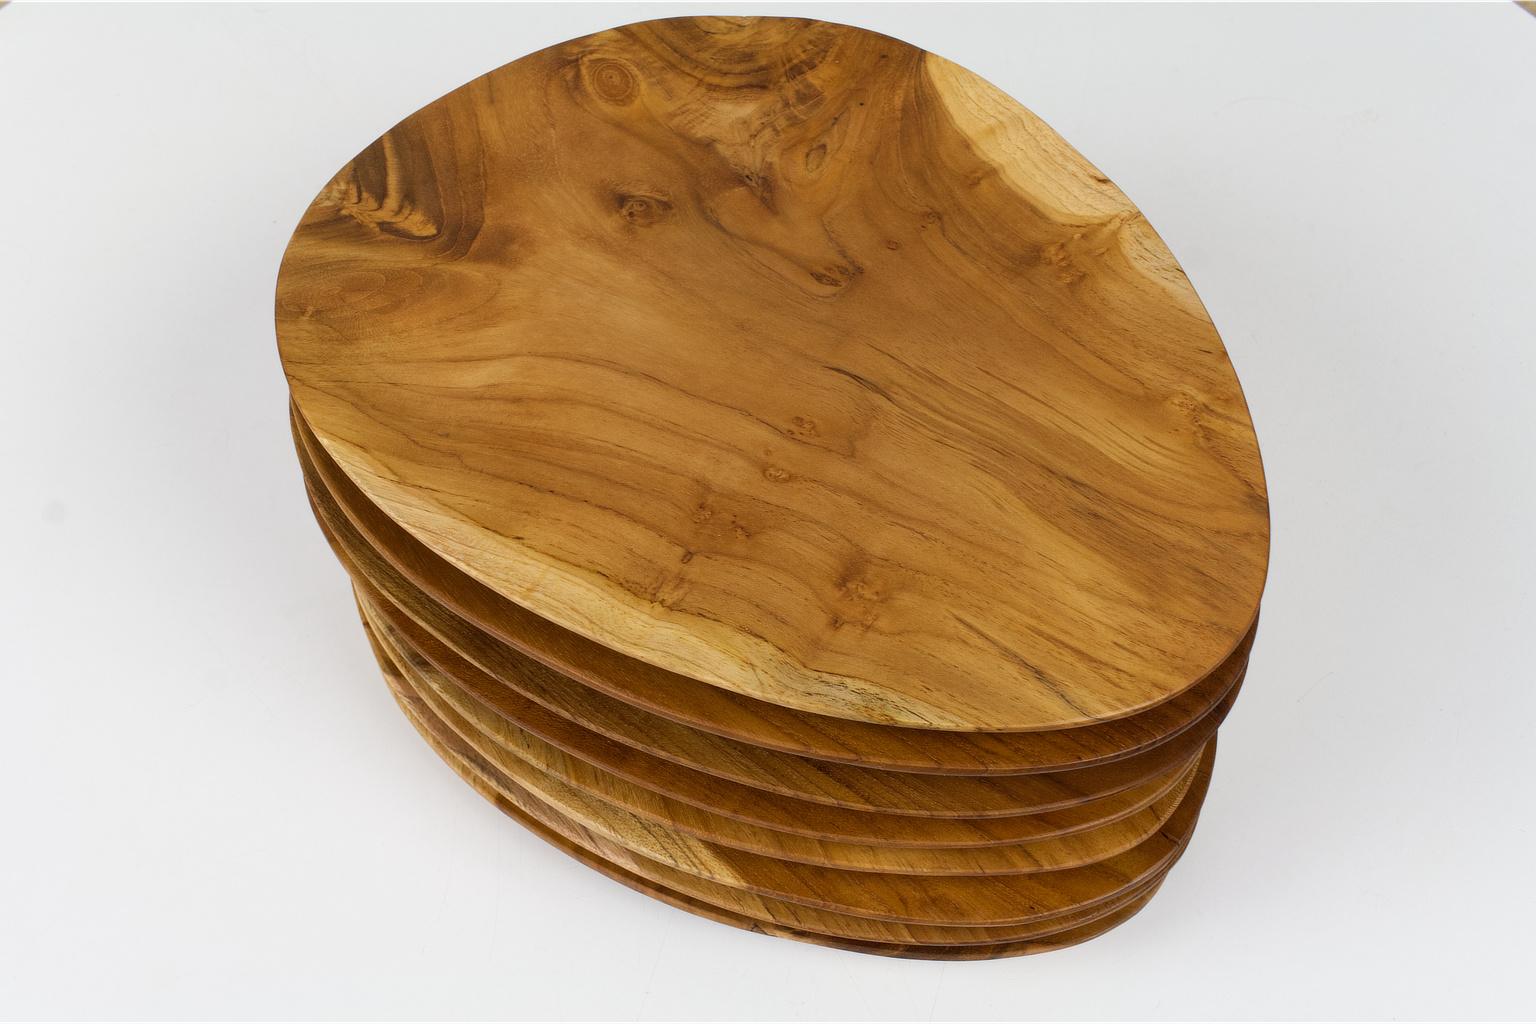 Set of 8 oval shaped and hand carved trays or serving platters in teak. The grain and coloring of the wood is beautiful. Each plate has a different coloring.